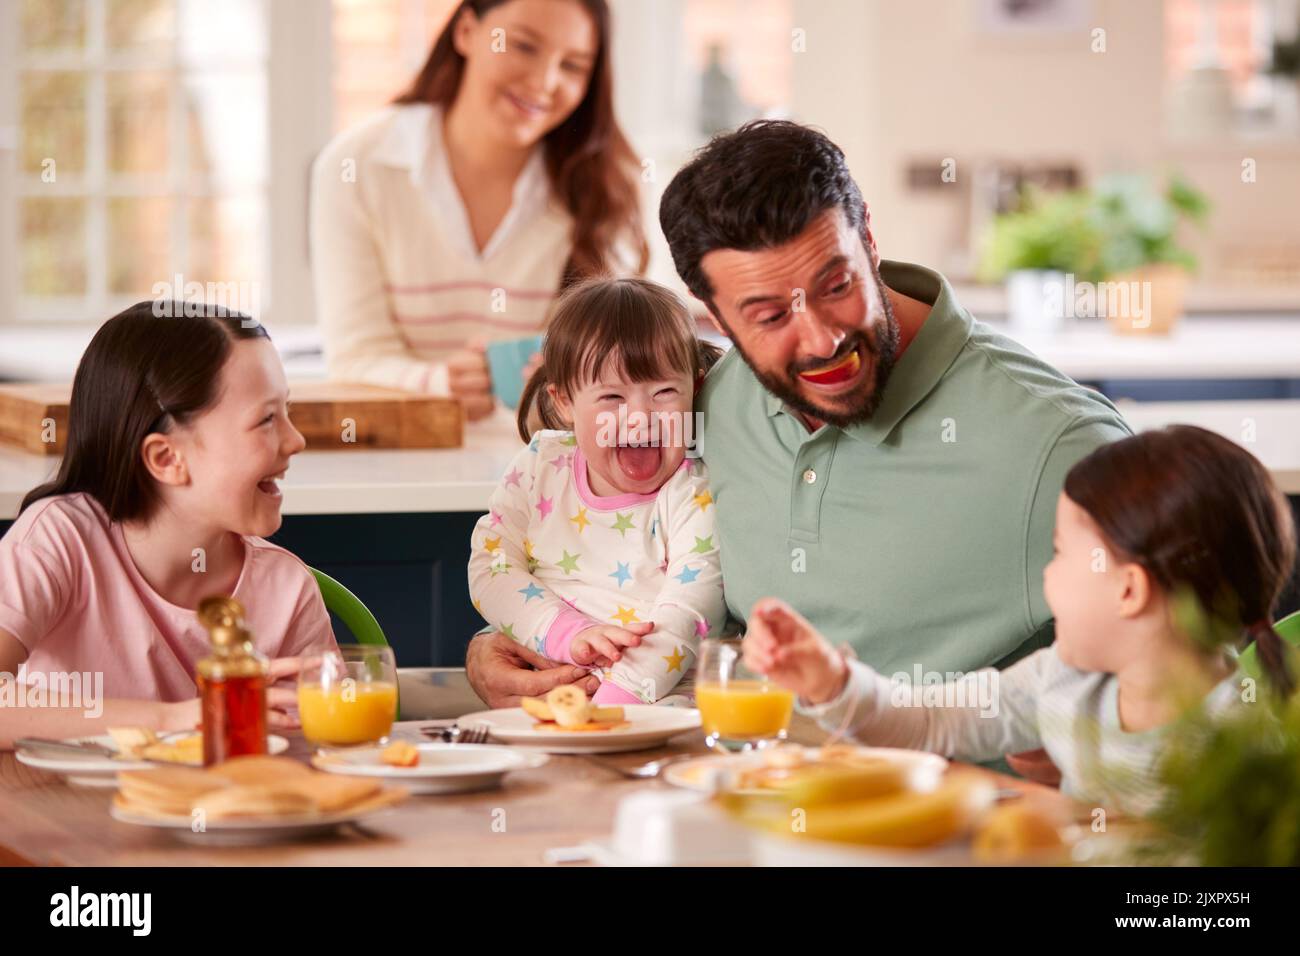 Father Making Funny Face As Family With Down Syndrome Daughter Eat Breakfast At Home Stock Photo